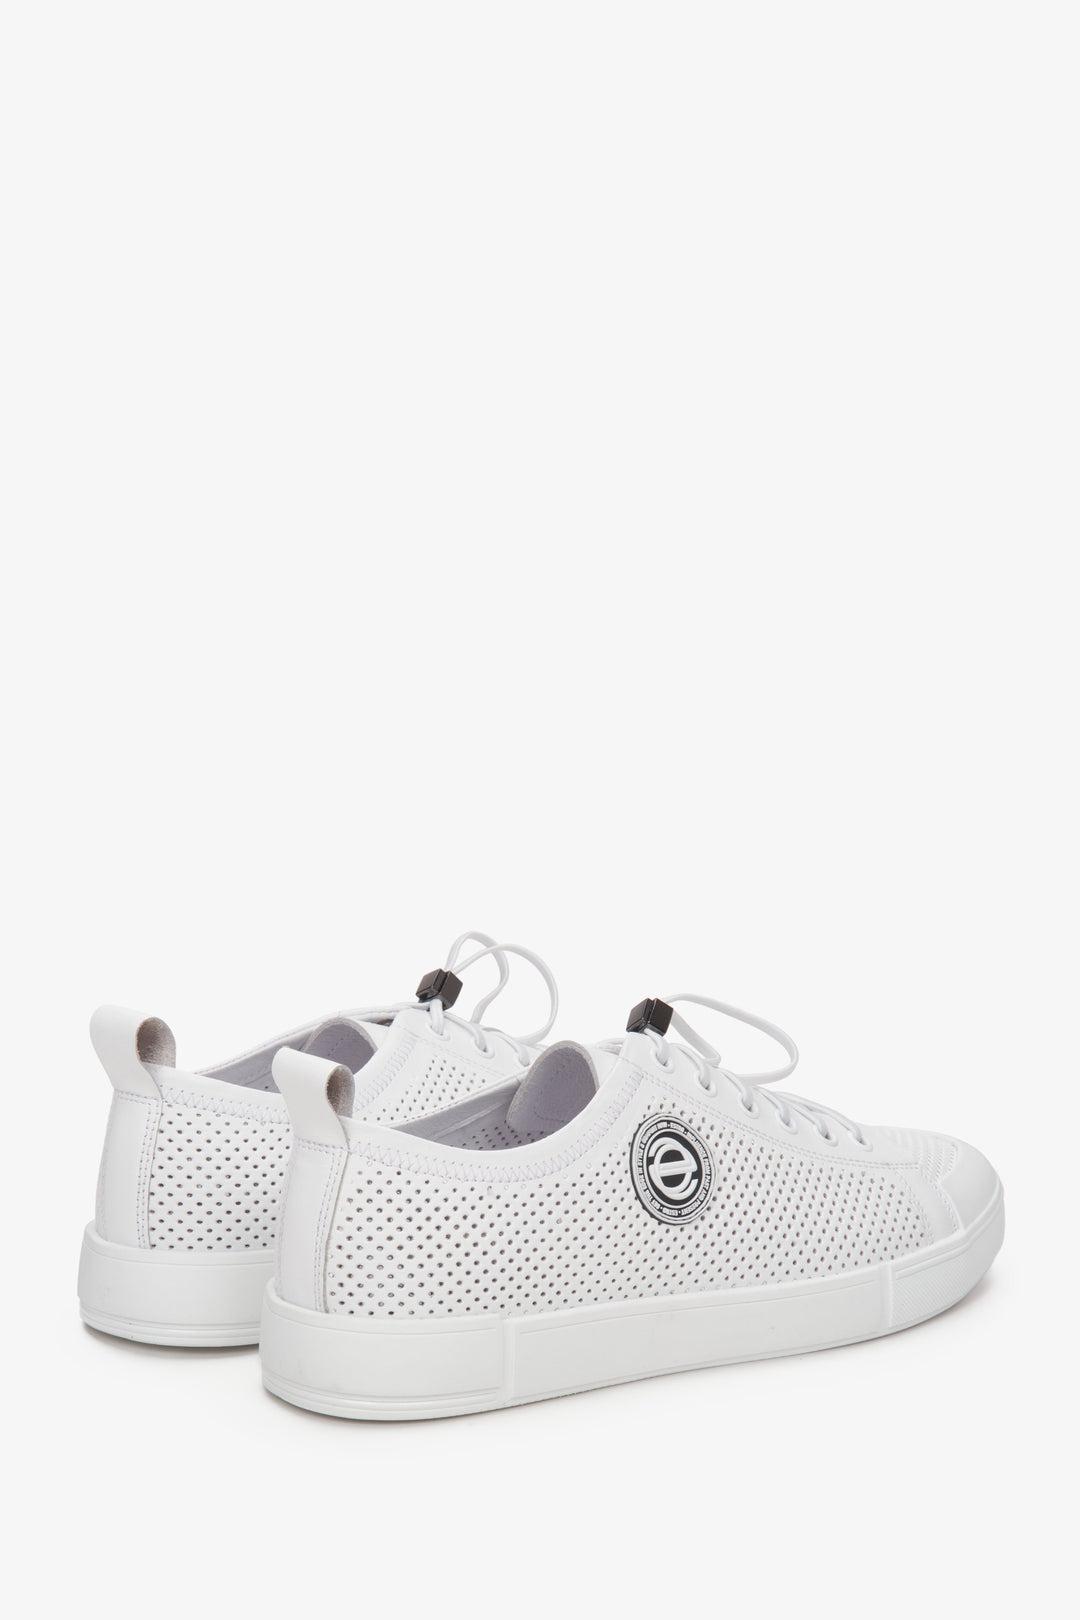 Men's summer sneakers in white colour, perforated - close-up on heel counter and shoe side.